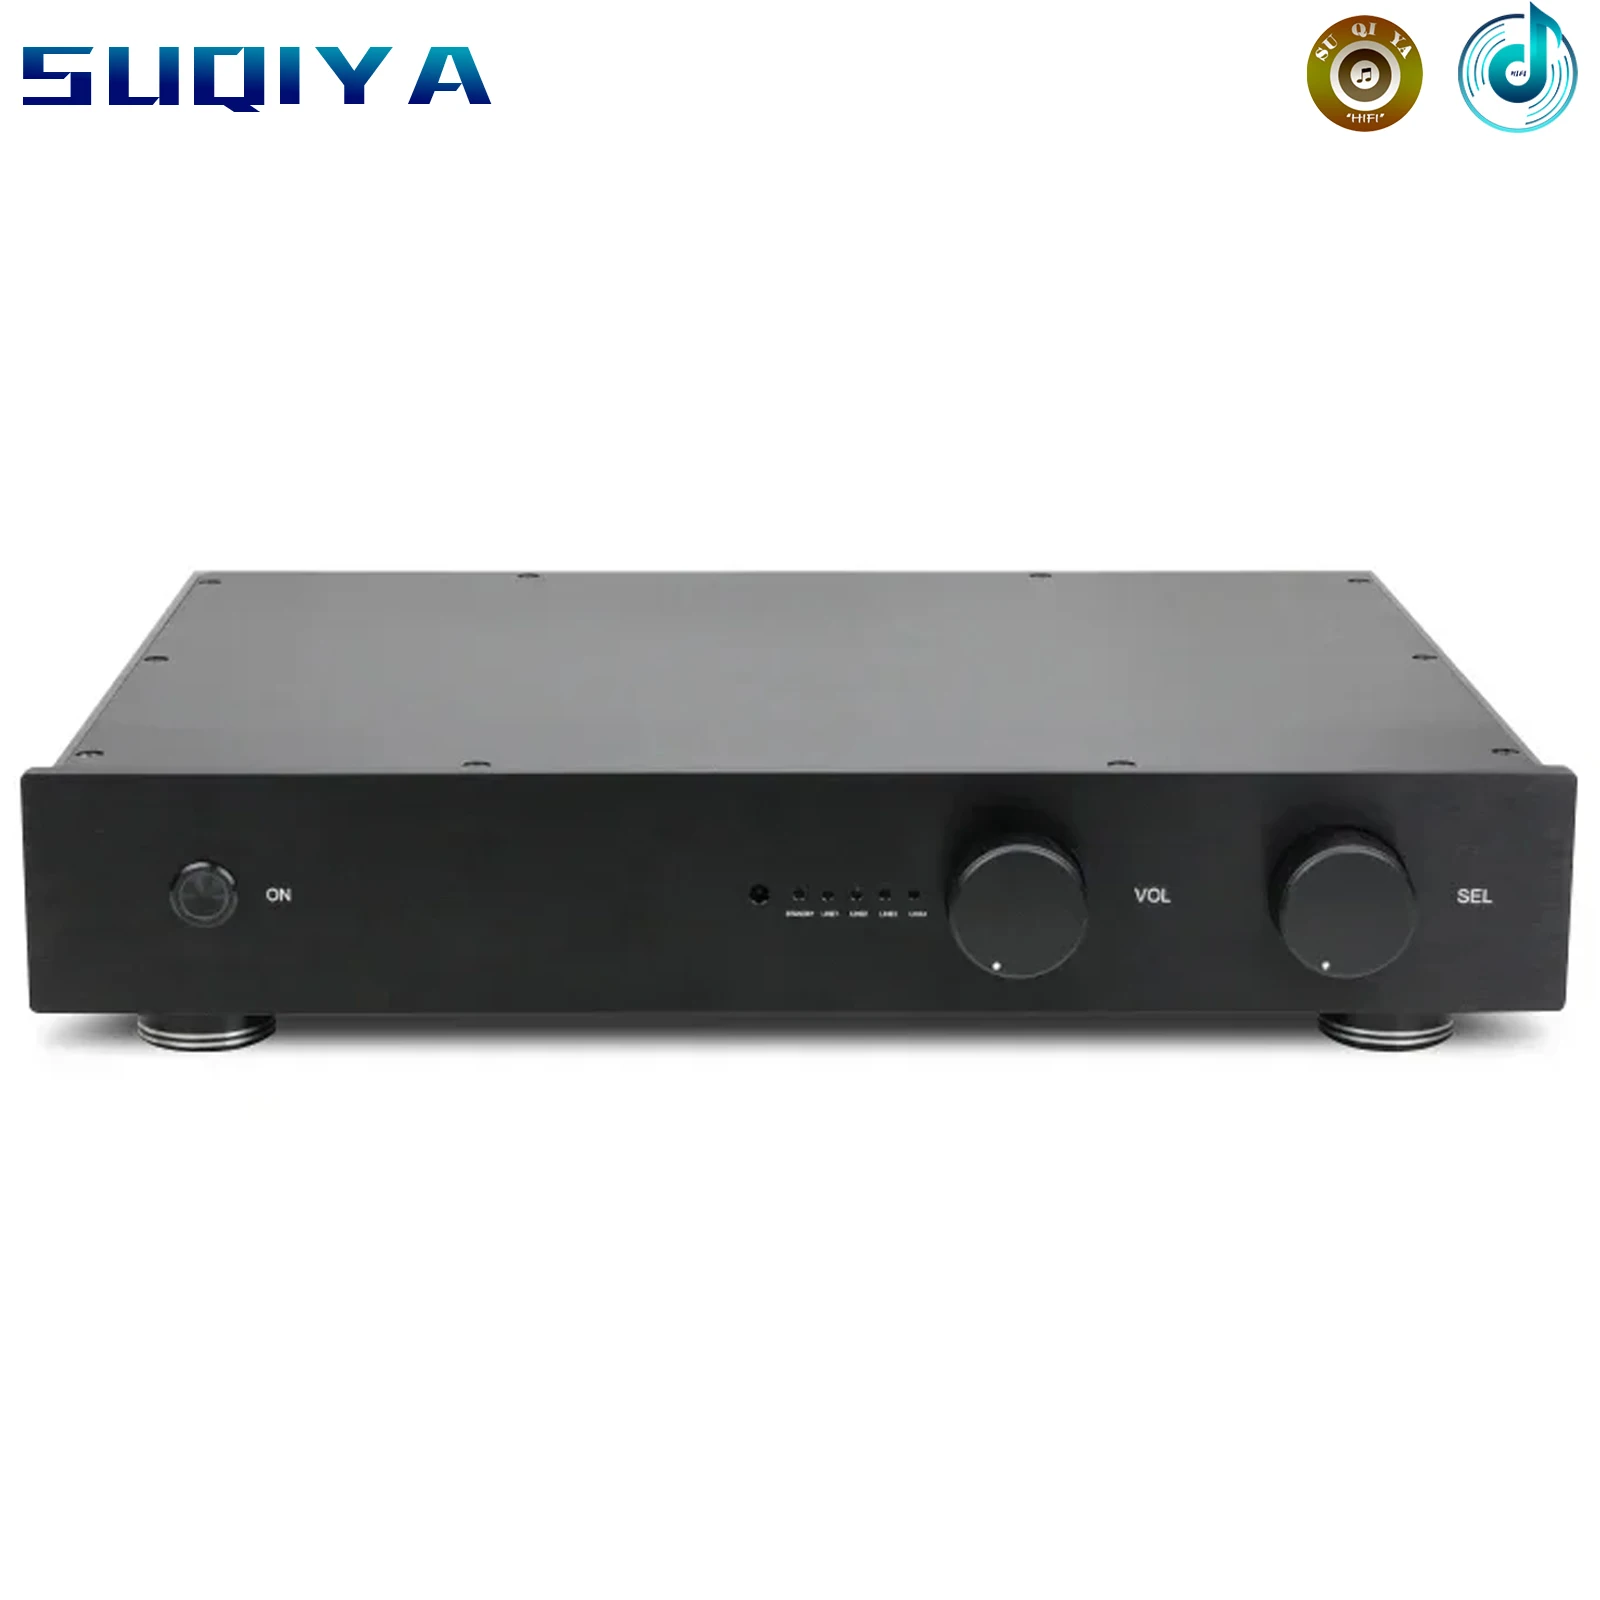 

SUQIYA-New Based on NAIM NAC152 Preamp & NAP200 Combined Amplifier 75W+75W 8 Ohm 4 Way RCA Input With Remote Control Version